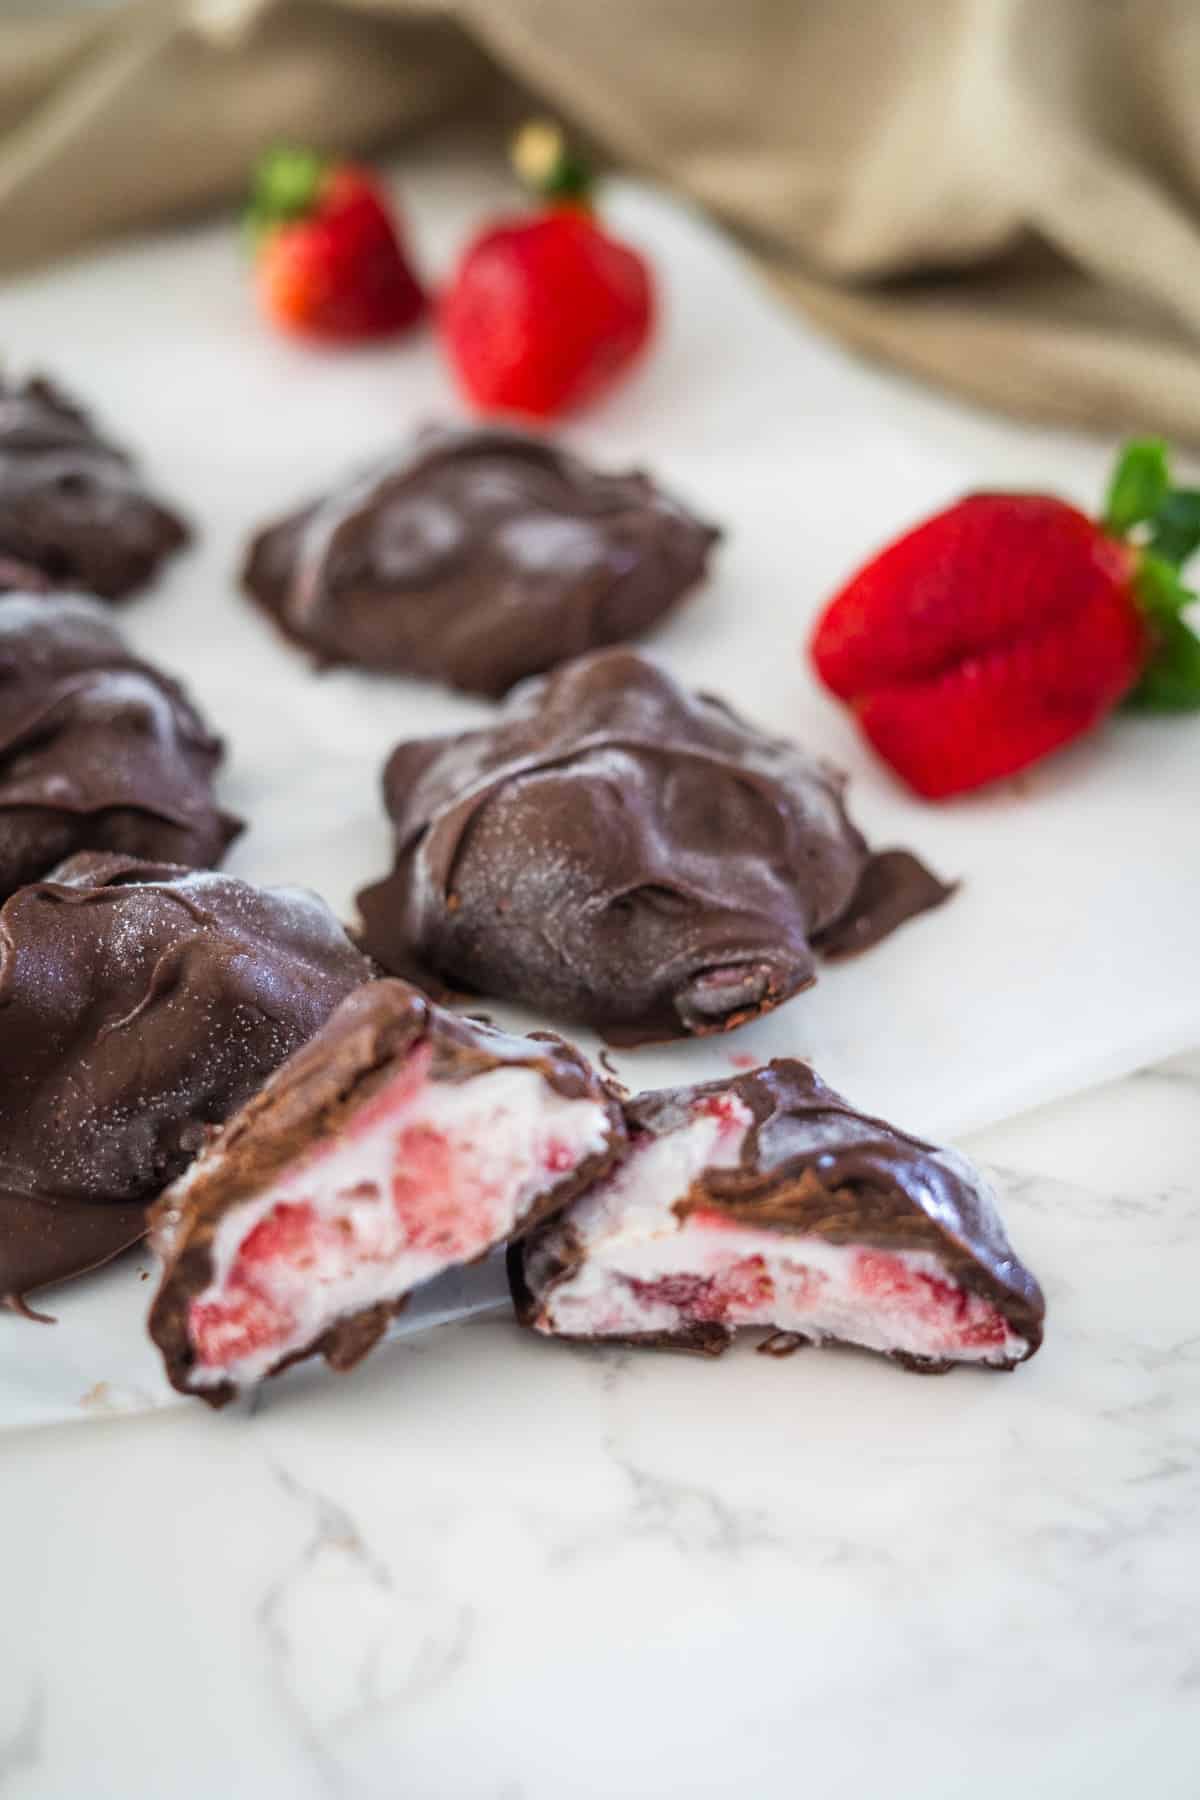 Indulge in decadent chocolate covered strawberries atop a white plate.